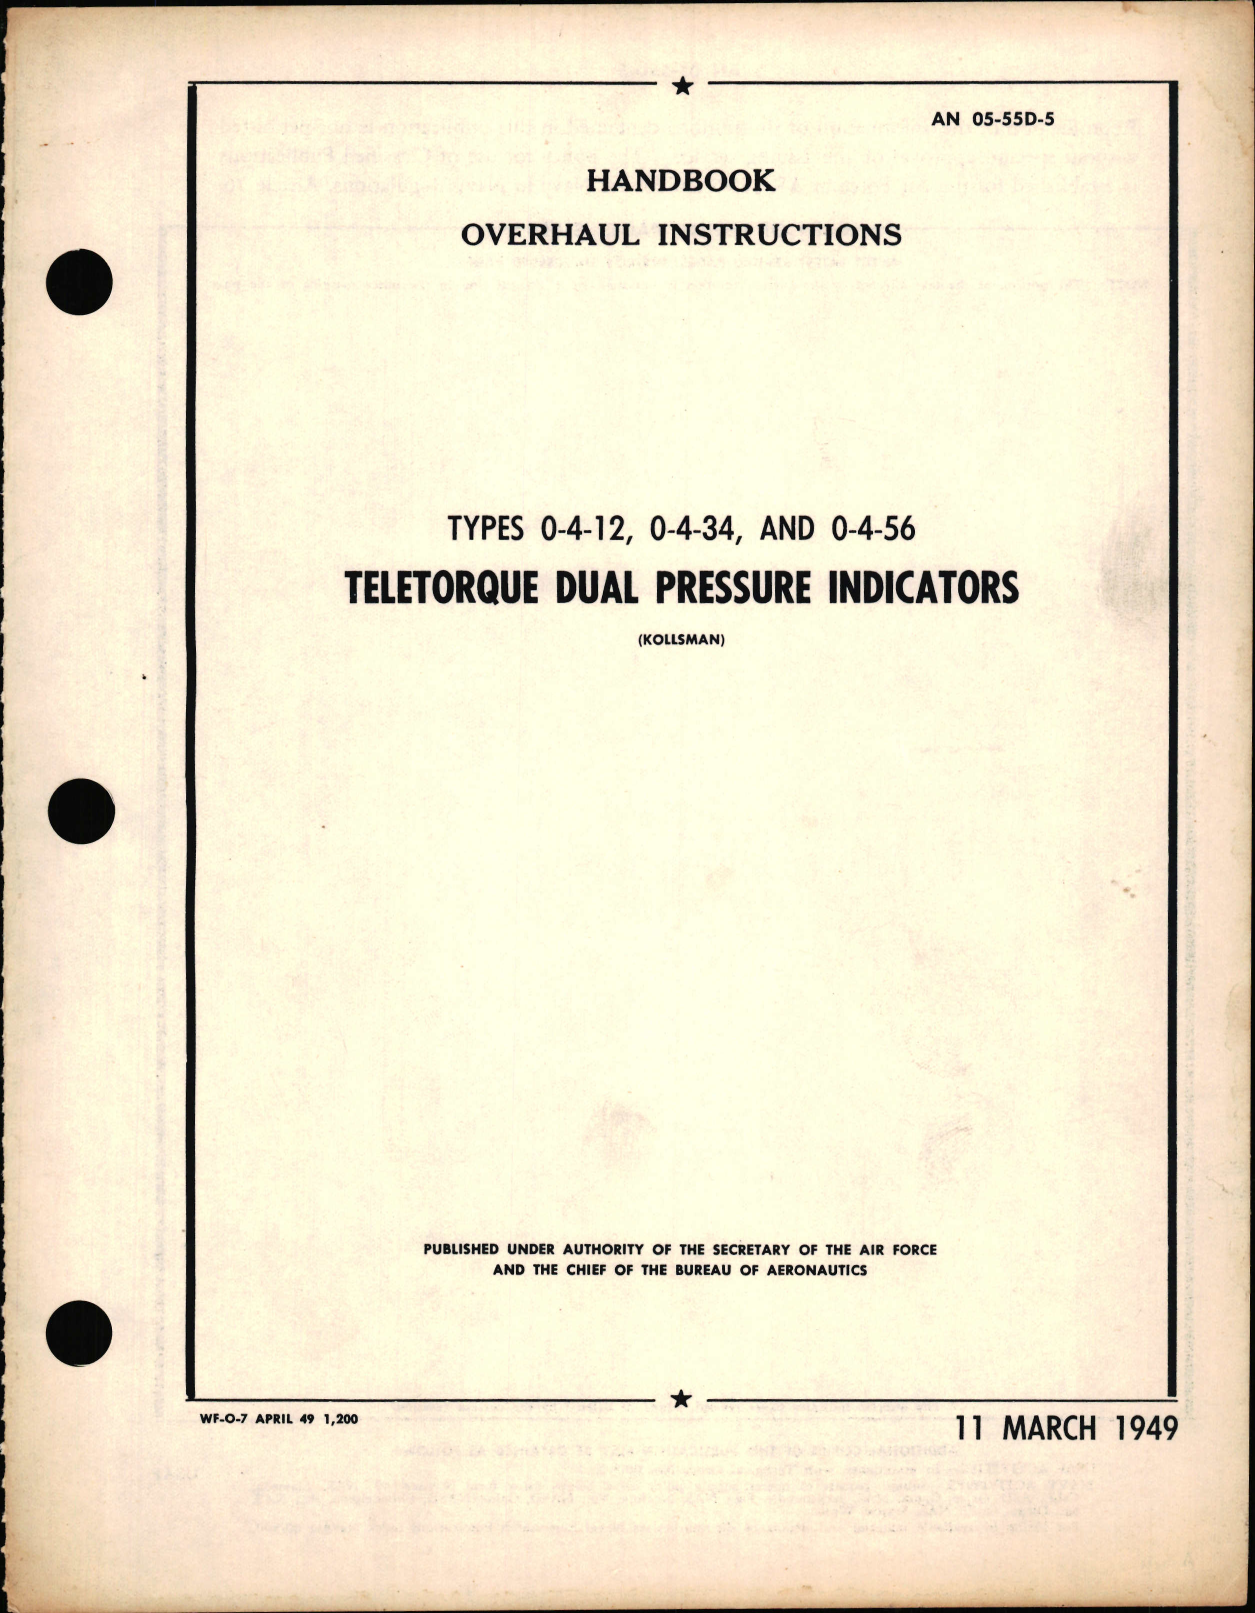 Sample page 1 from AirCorps Library document: Overhaul Instructions for Teletorque Dual Pressure Indicators, Types 0-4-12, 0-4-34 and 0-4-56